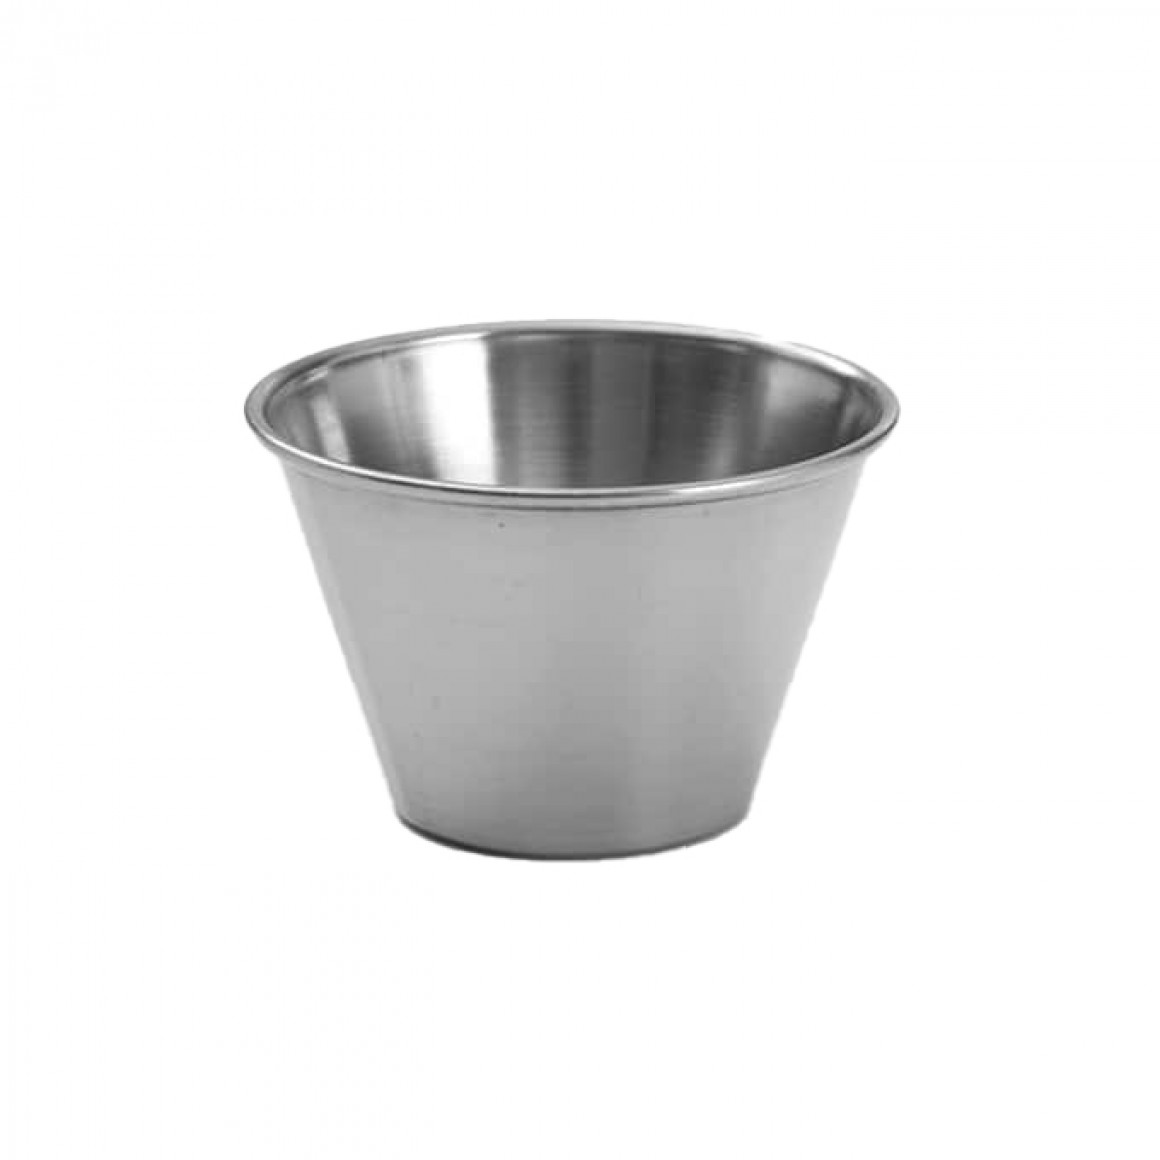 SAUCE CUP, STAINLESS STEEL, ROUND, 4 OZ.